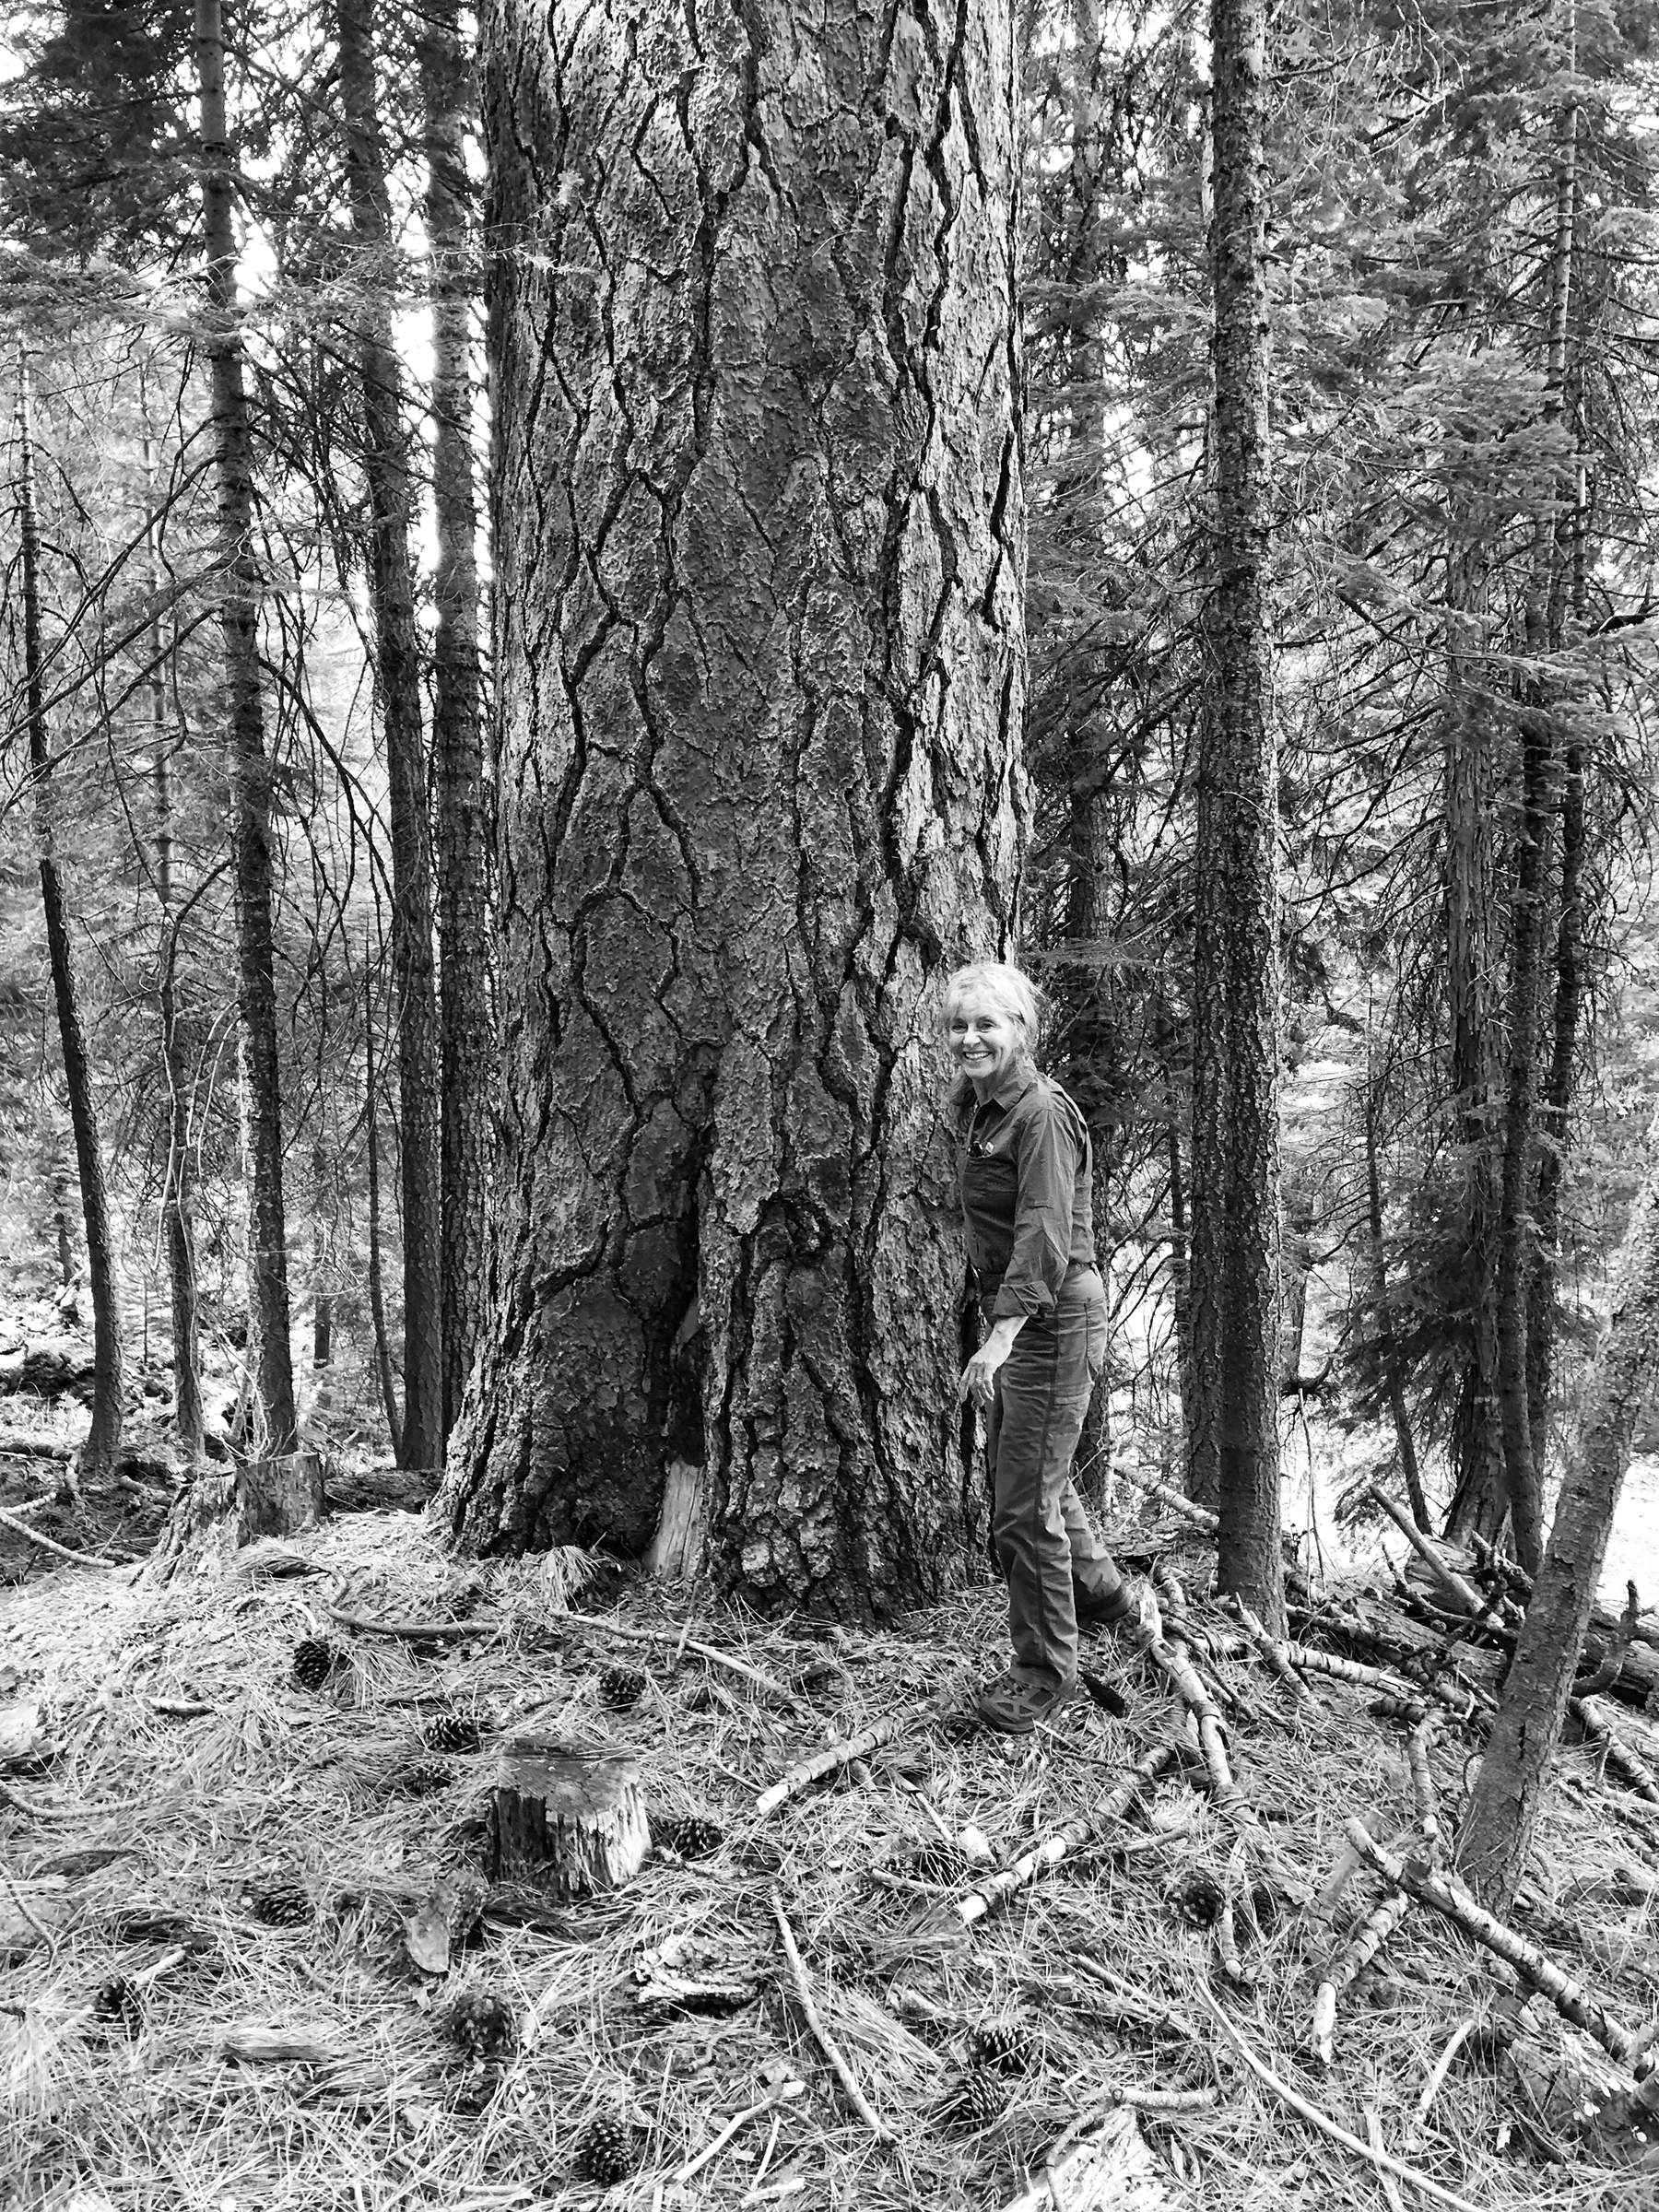 Marie Davis standing next to trees in a forest.